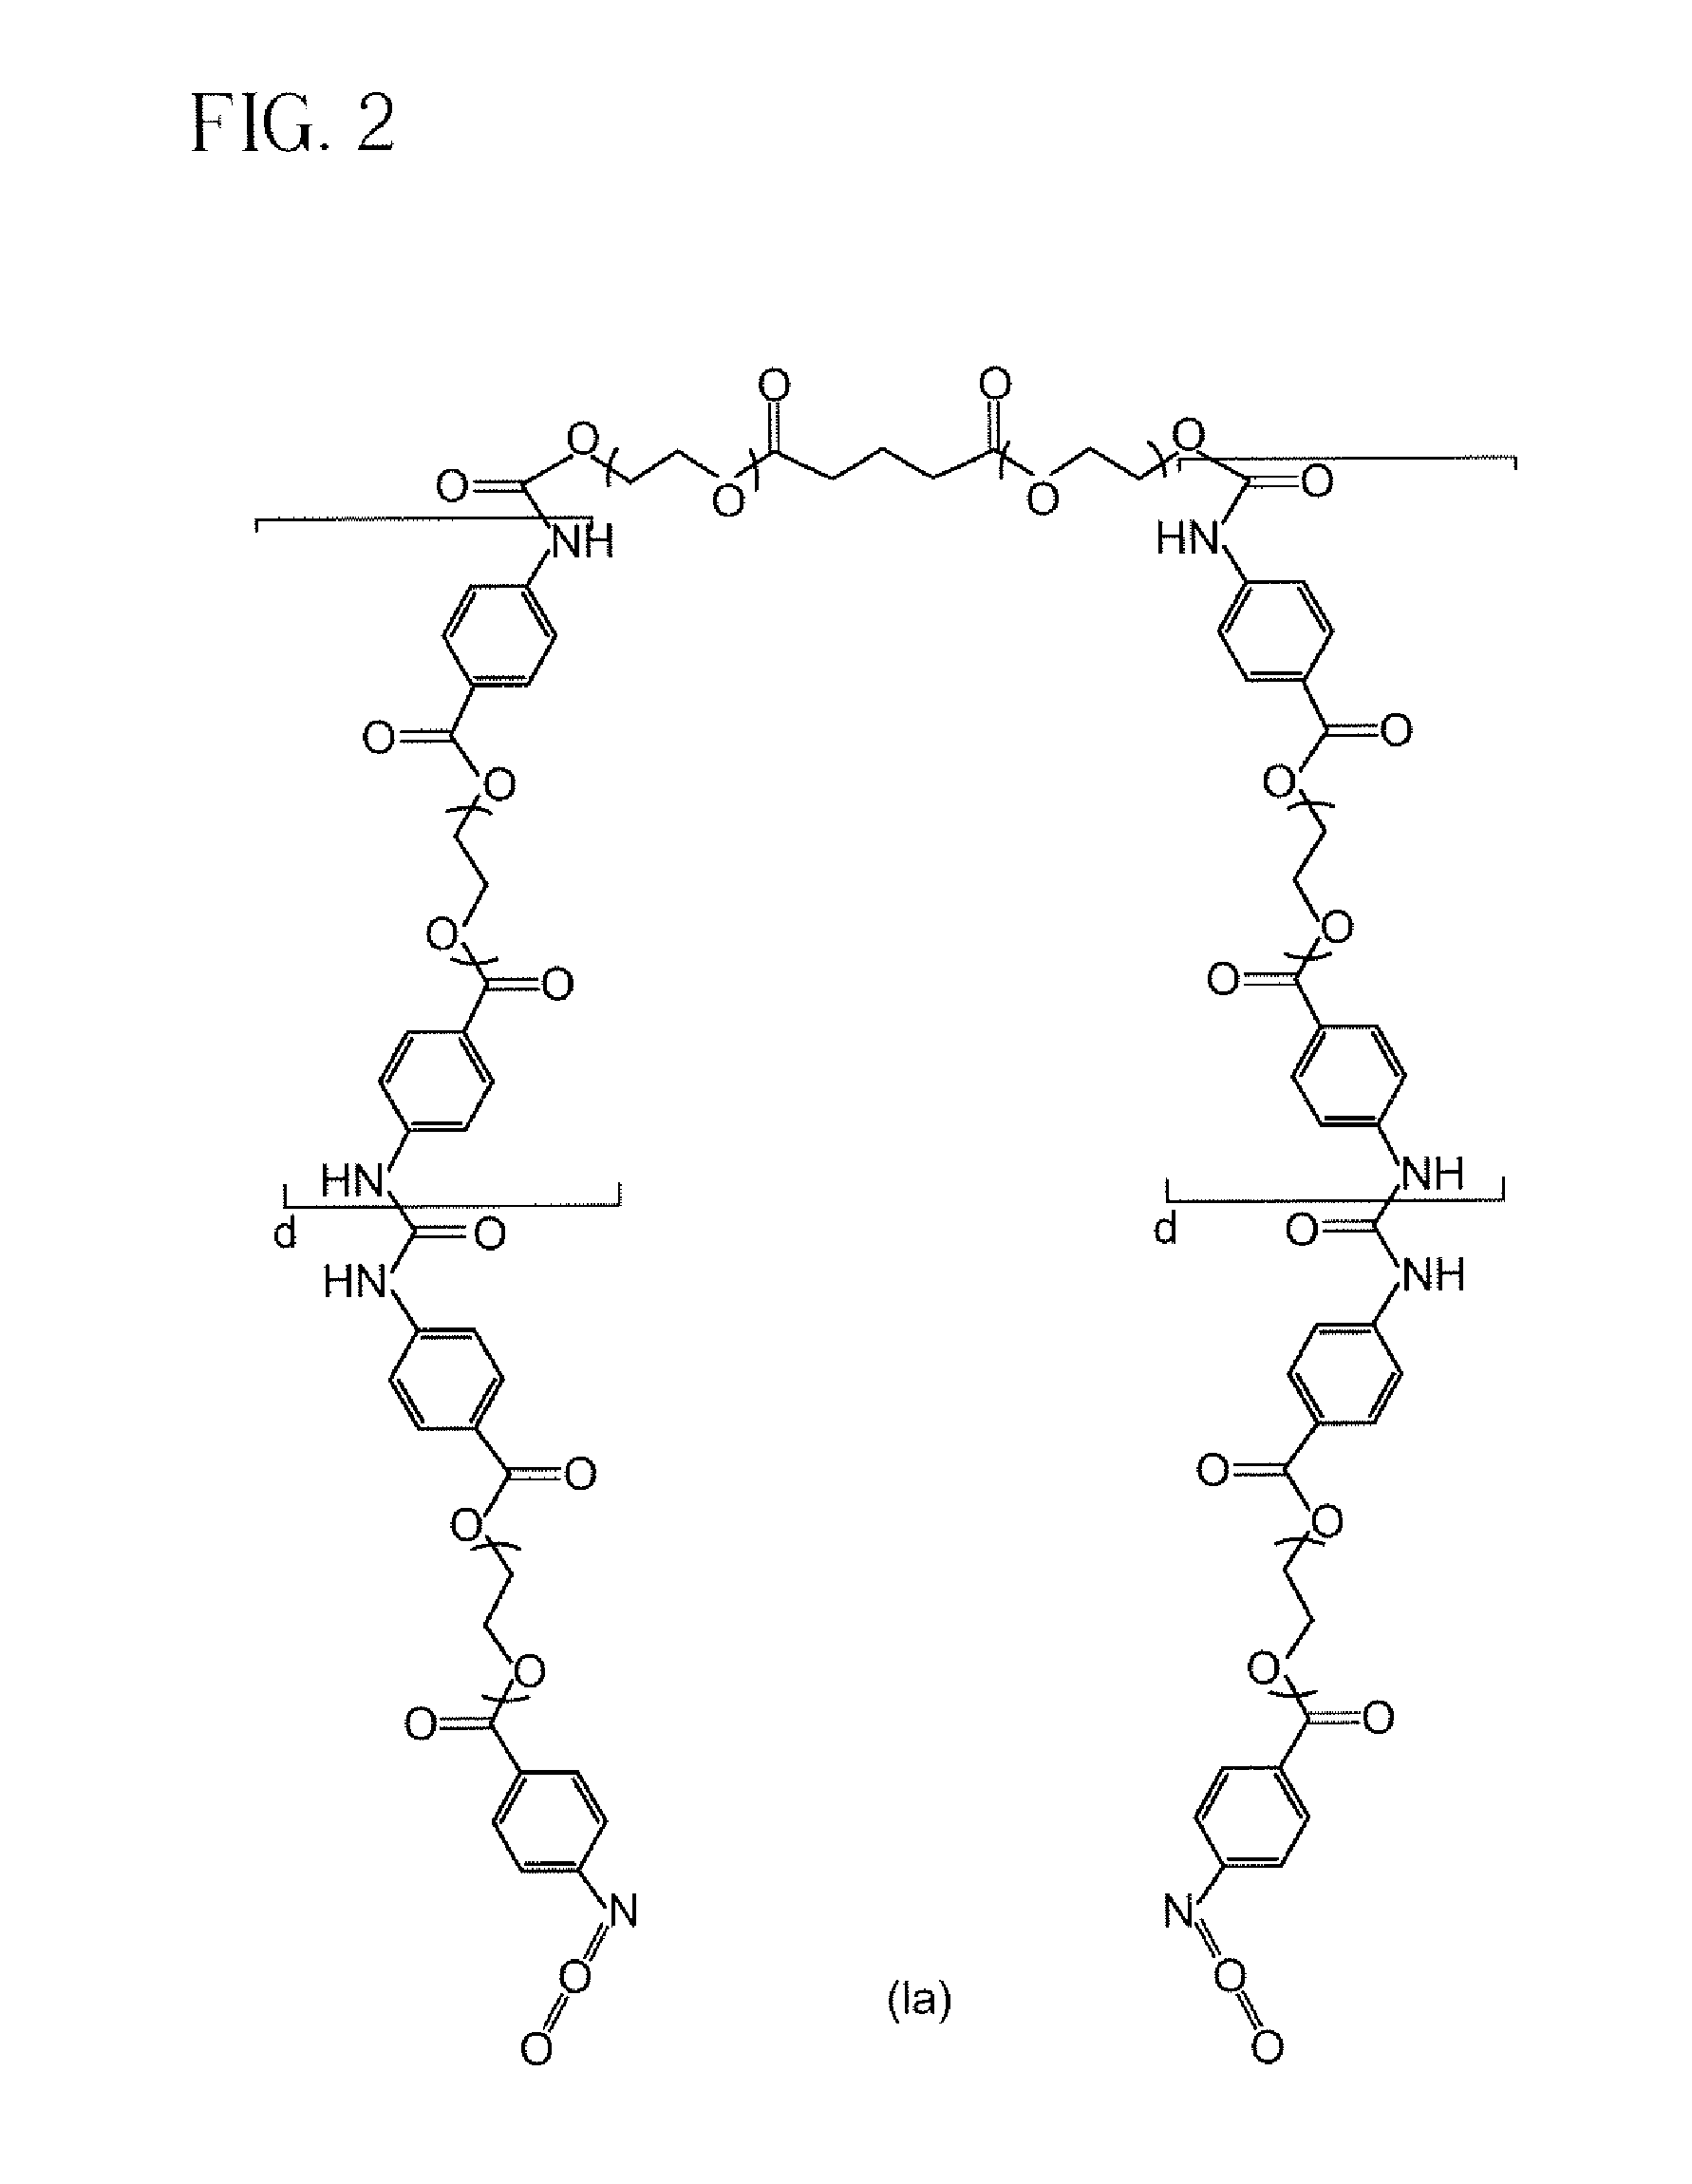 Medically acceptable formulation of a diisocyanate terminated macromer for use as an internal adhesive or sealant